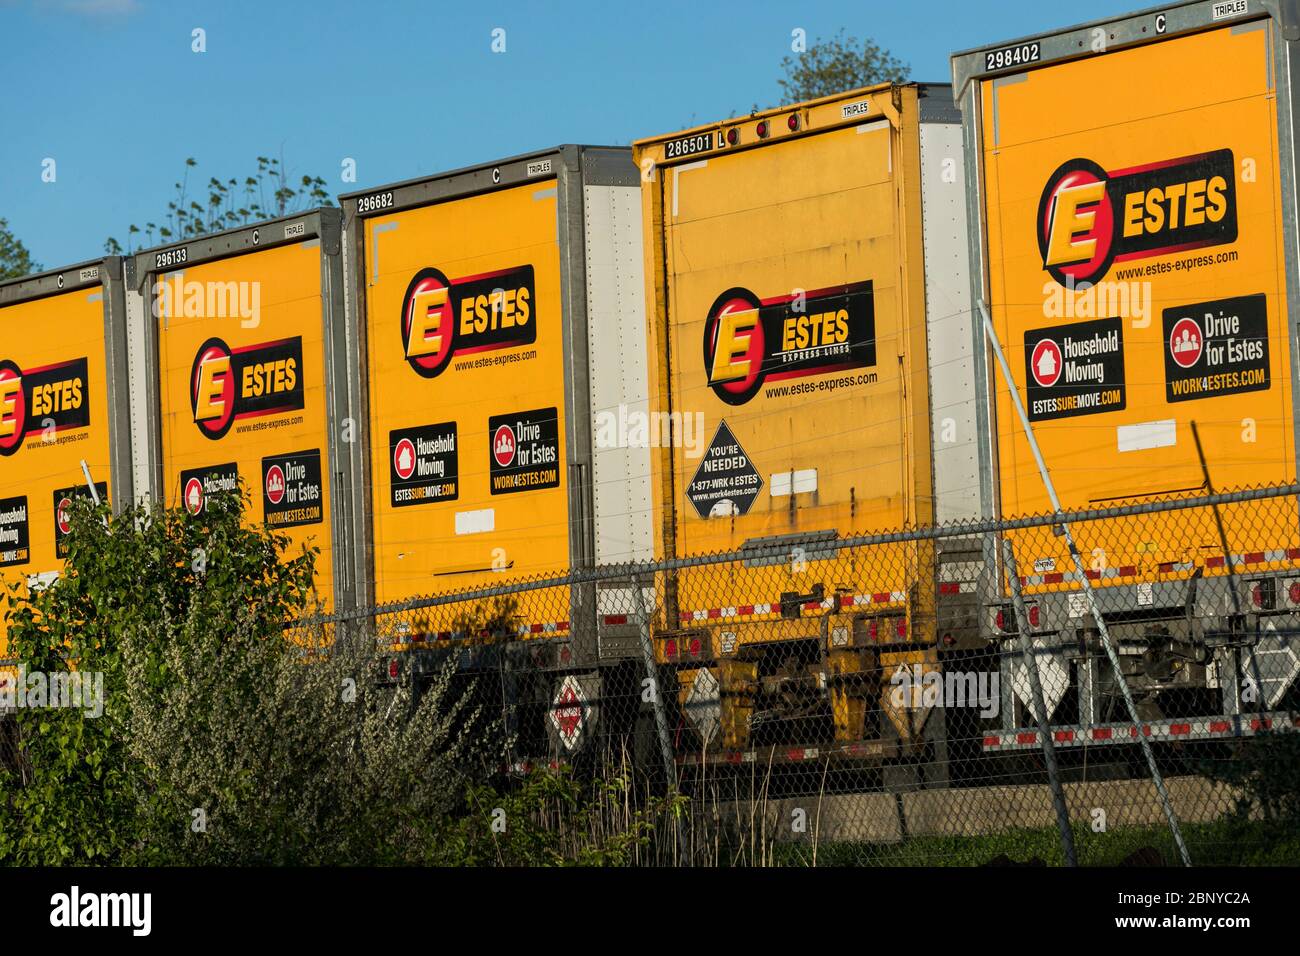 Truck trailers with logos outside of a facility occupied by Estes Express Lines in Norristown, Pennsylvania on May 4, 2020. Stock Photo